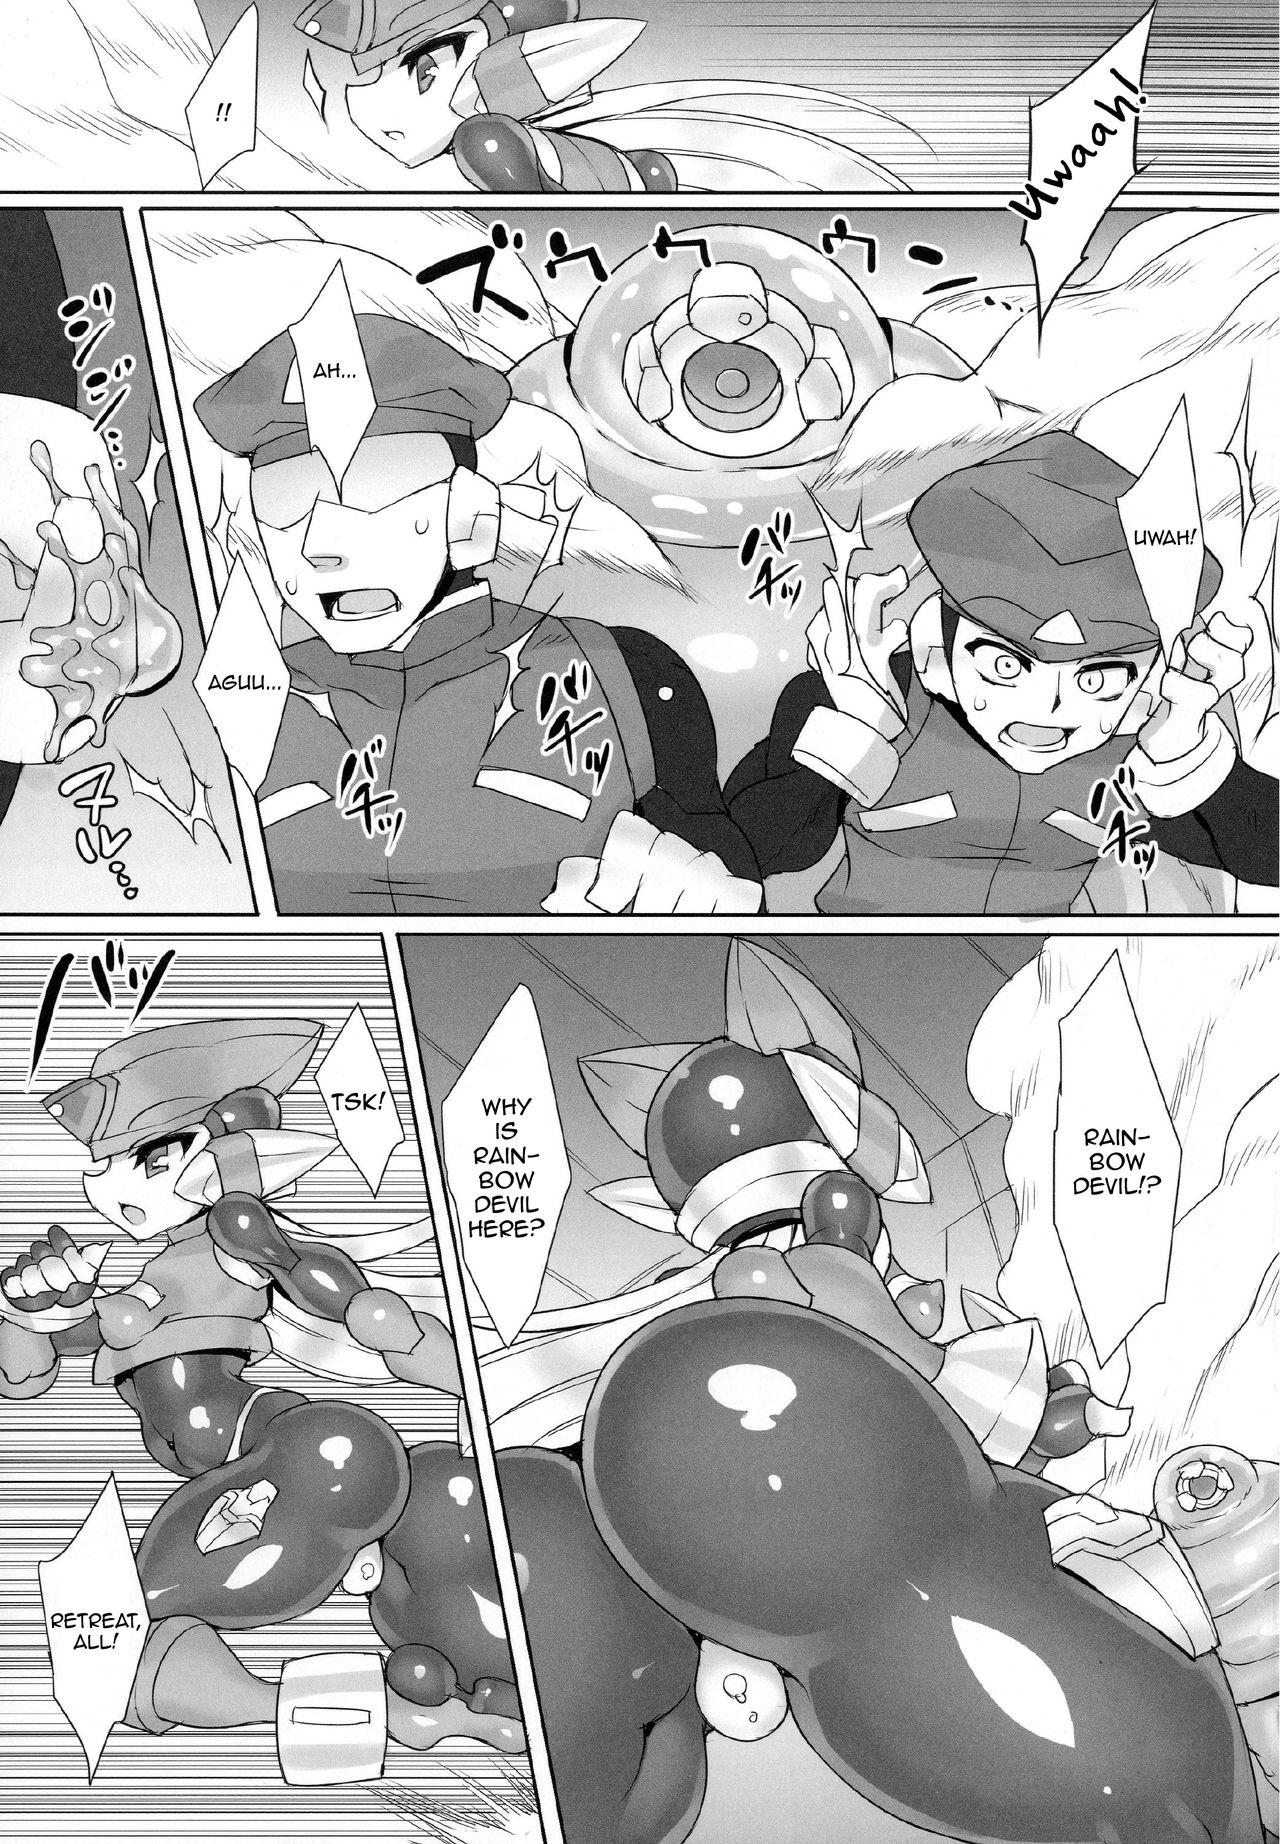 Class Room Red Hero Does Not Yield - Megaman zero Sixtynine - Page 5